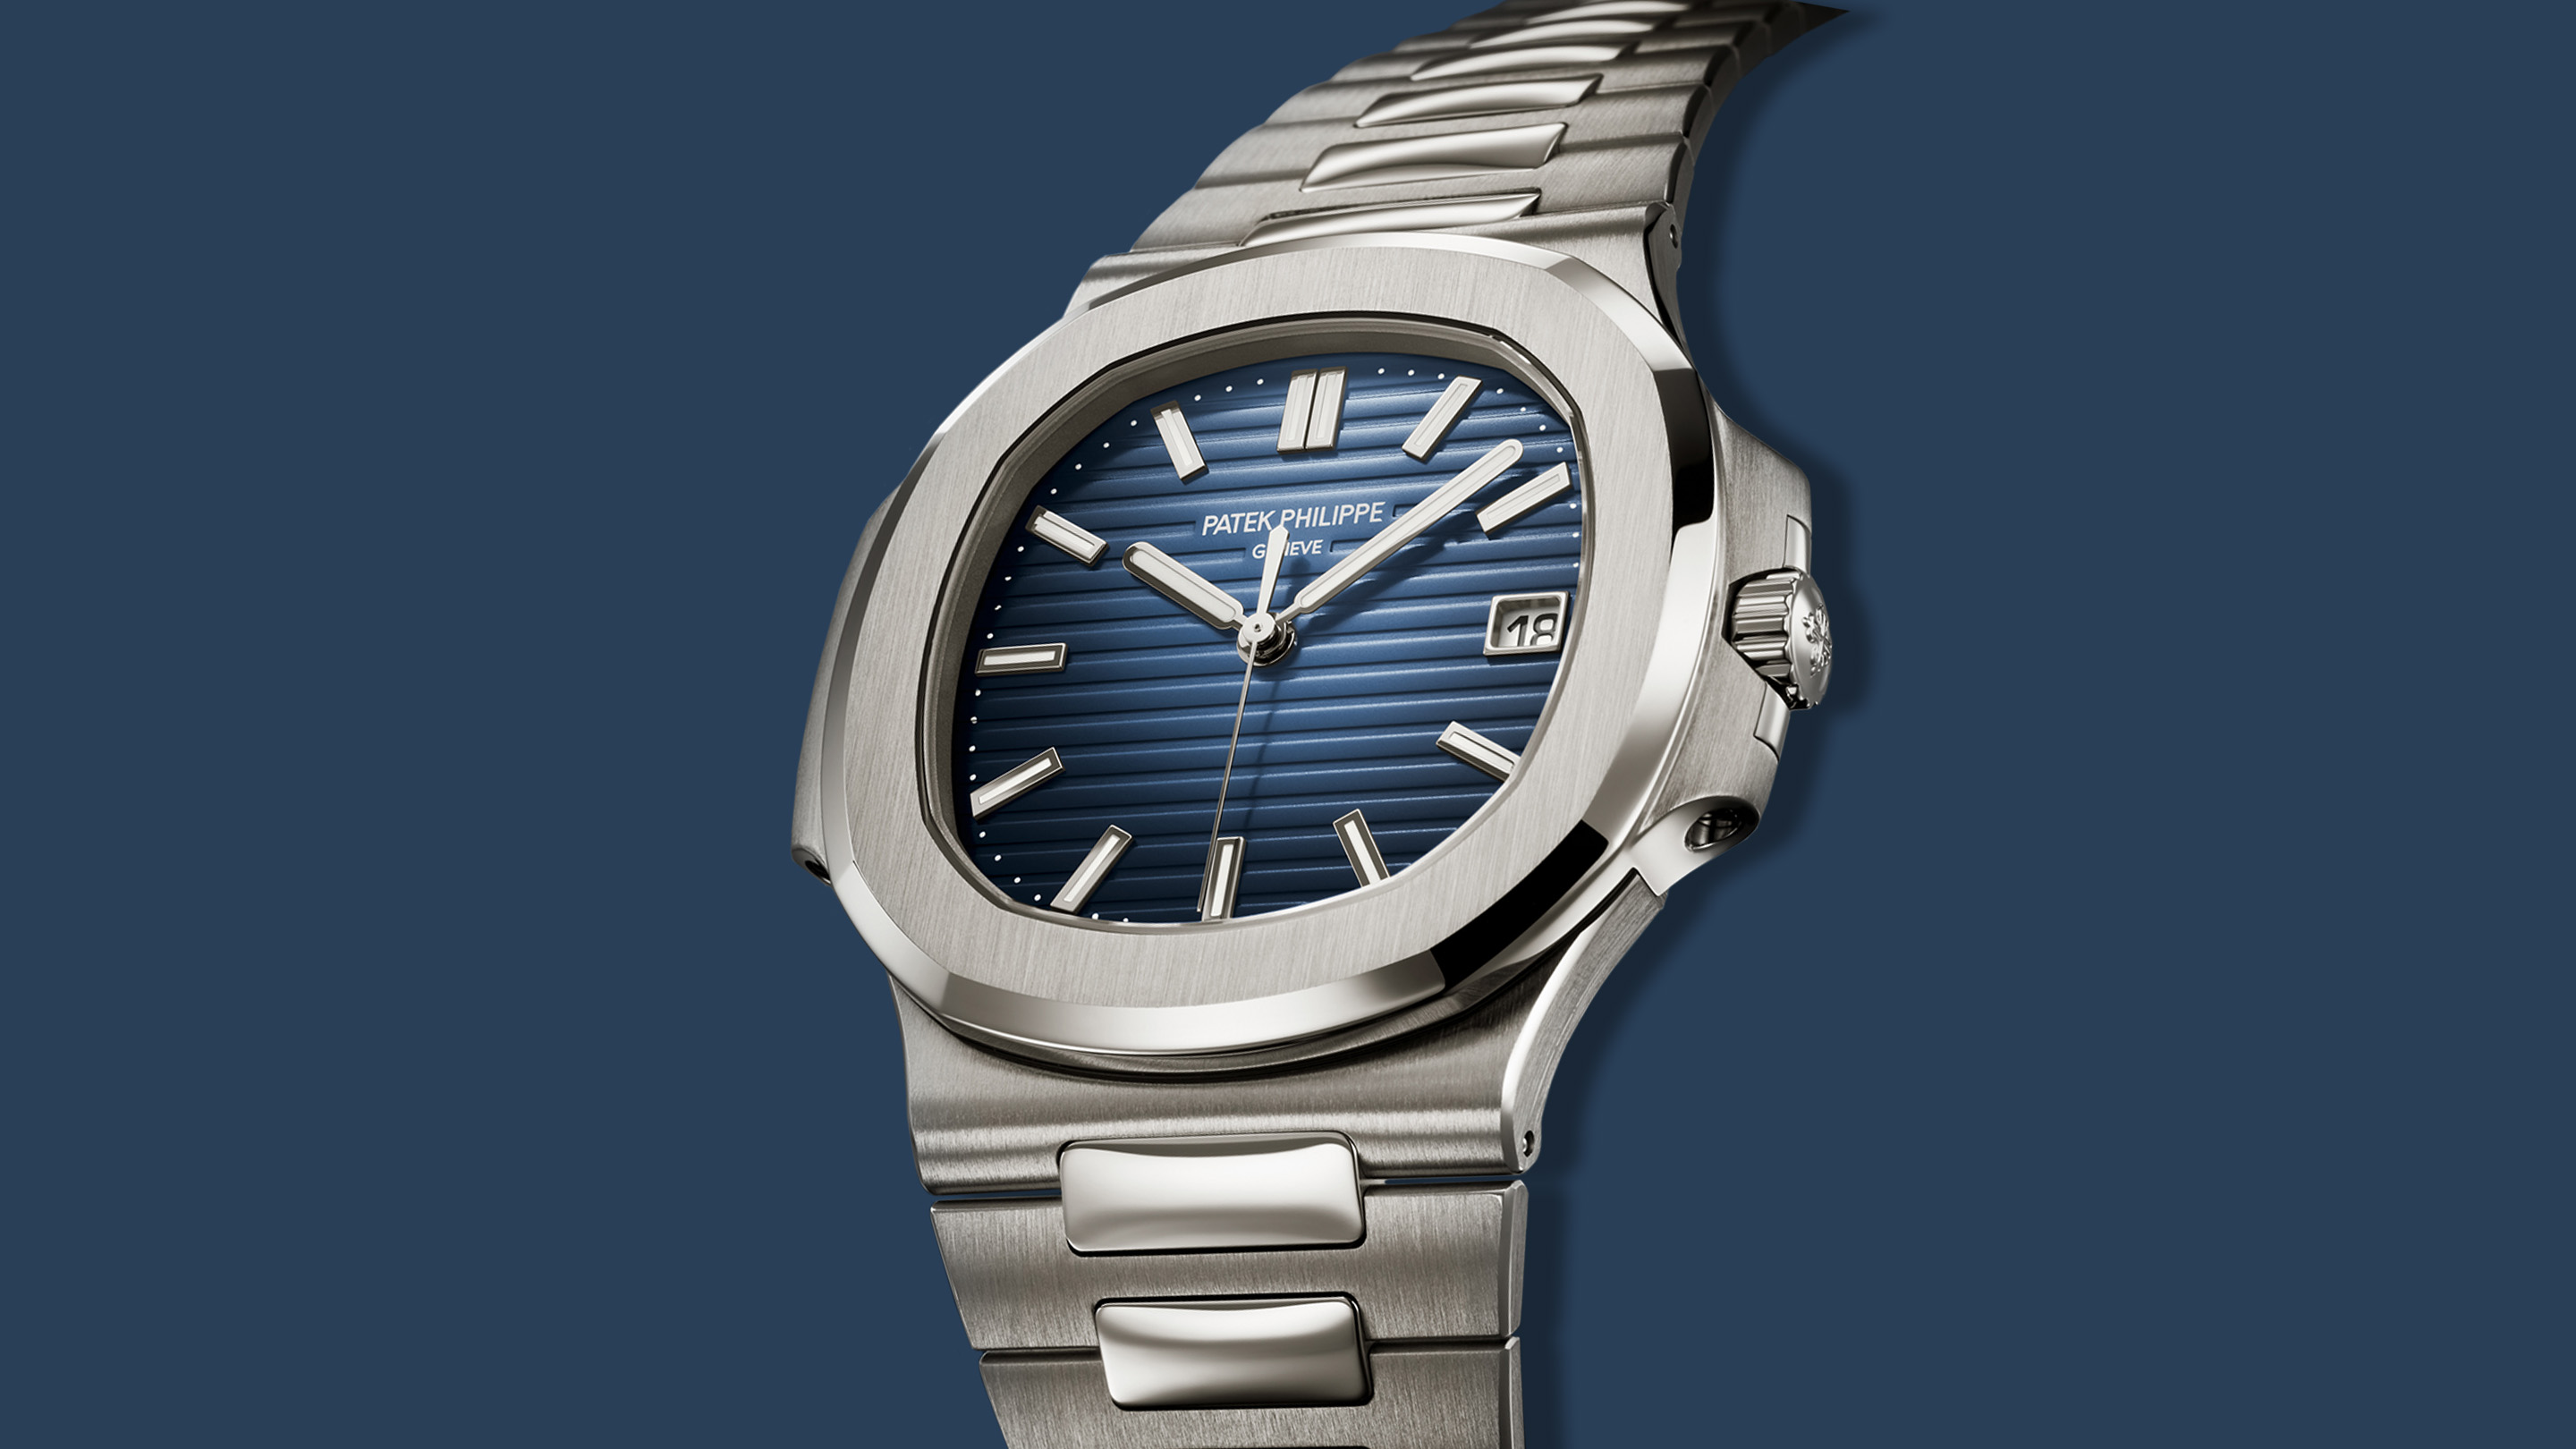 First White Gold Patek Philippe Nautilus 5811 Sells On Watchcollecting.com  For £118,000